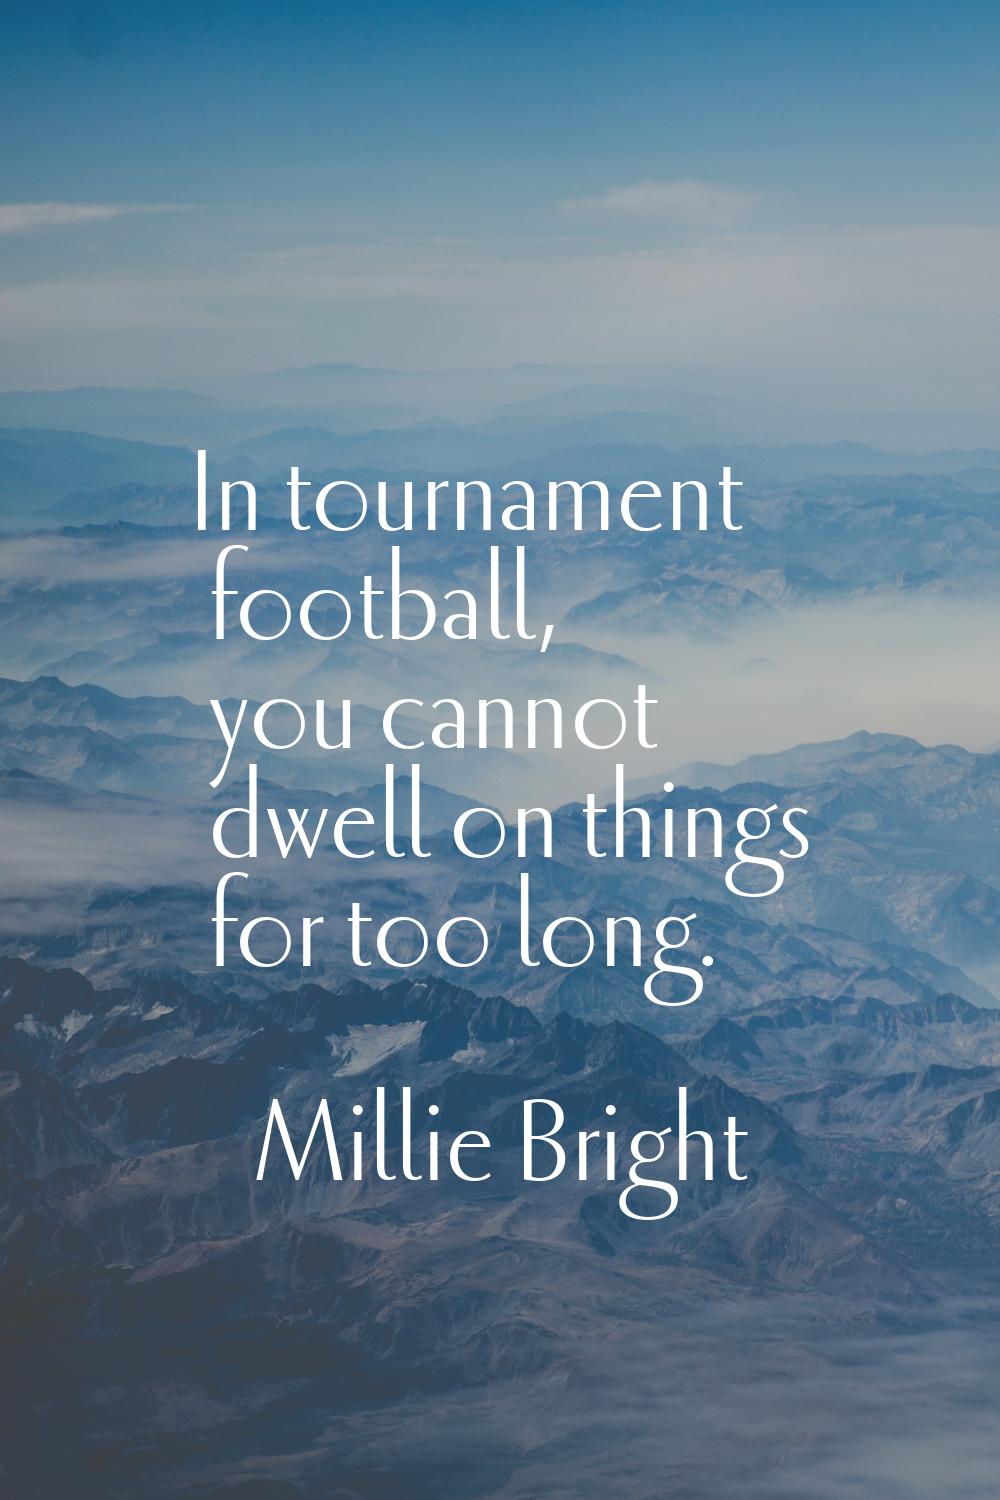 In tournament football, you cannot dwell on things for too long.